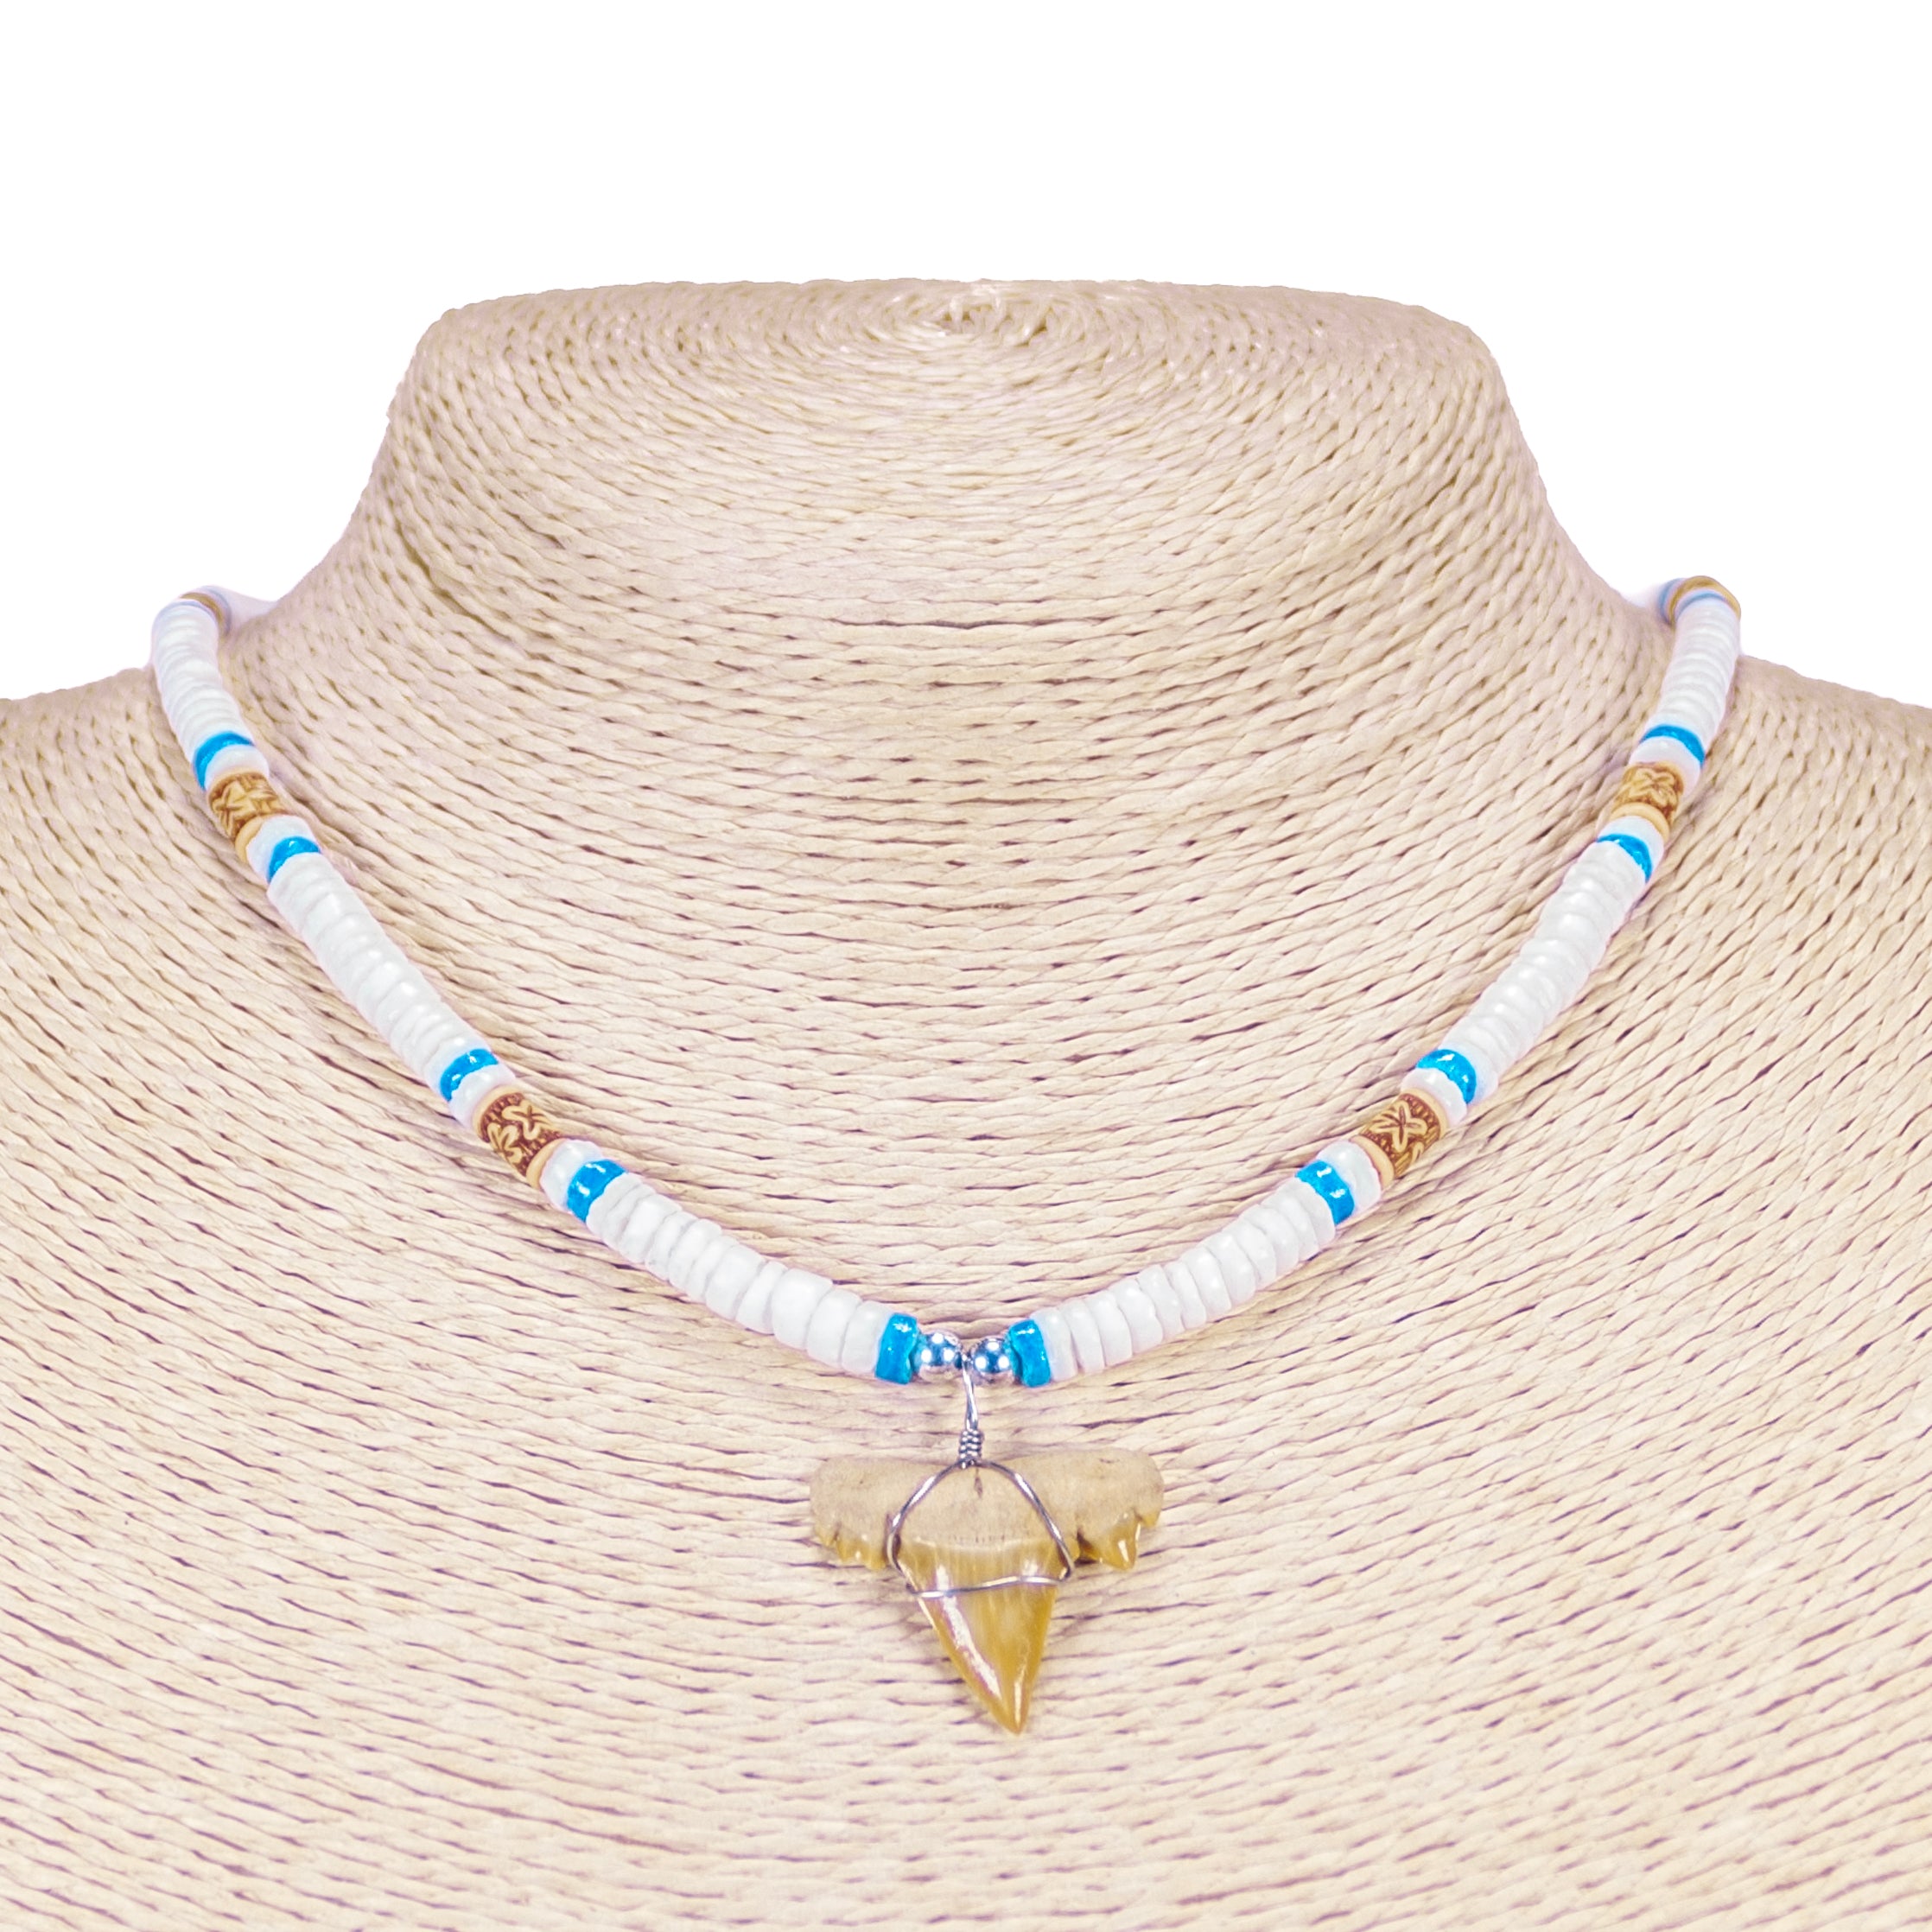 1"+ Shark Tooth Pendant on White and Blue Puka Shell Beads Necklace